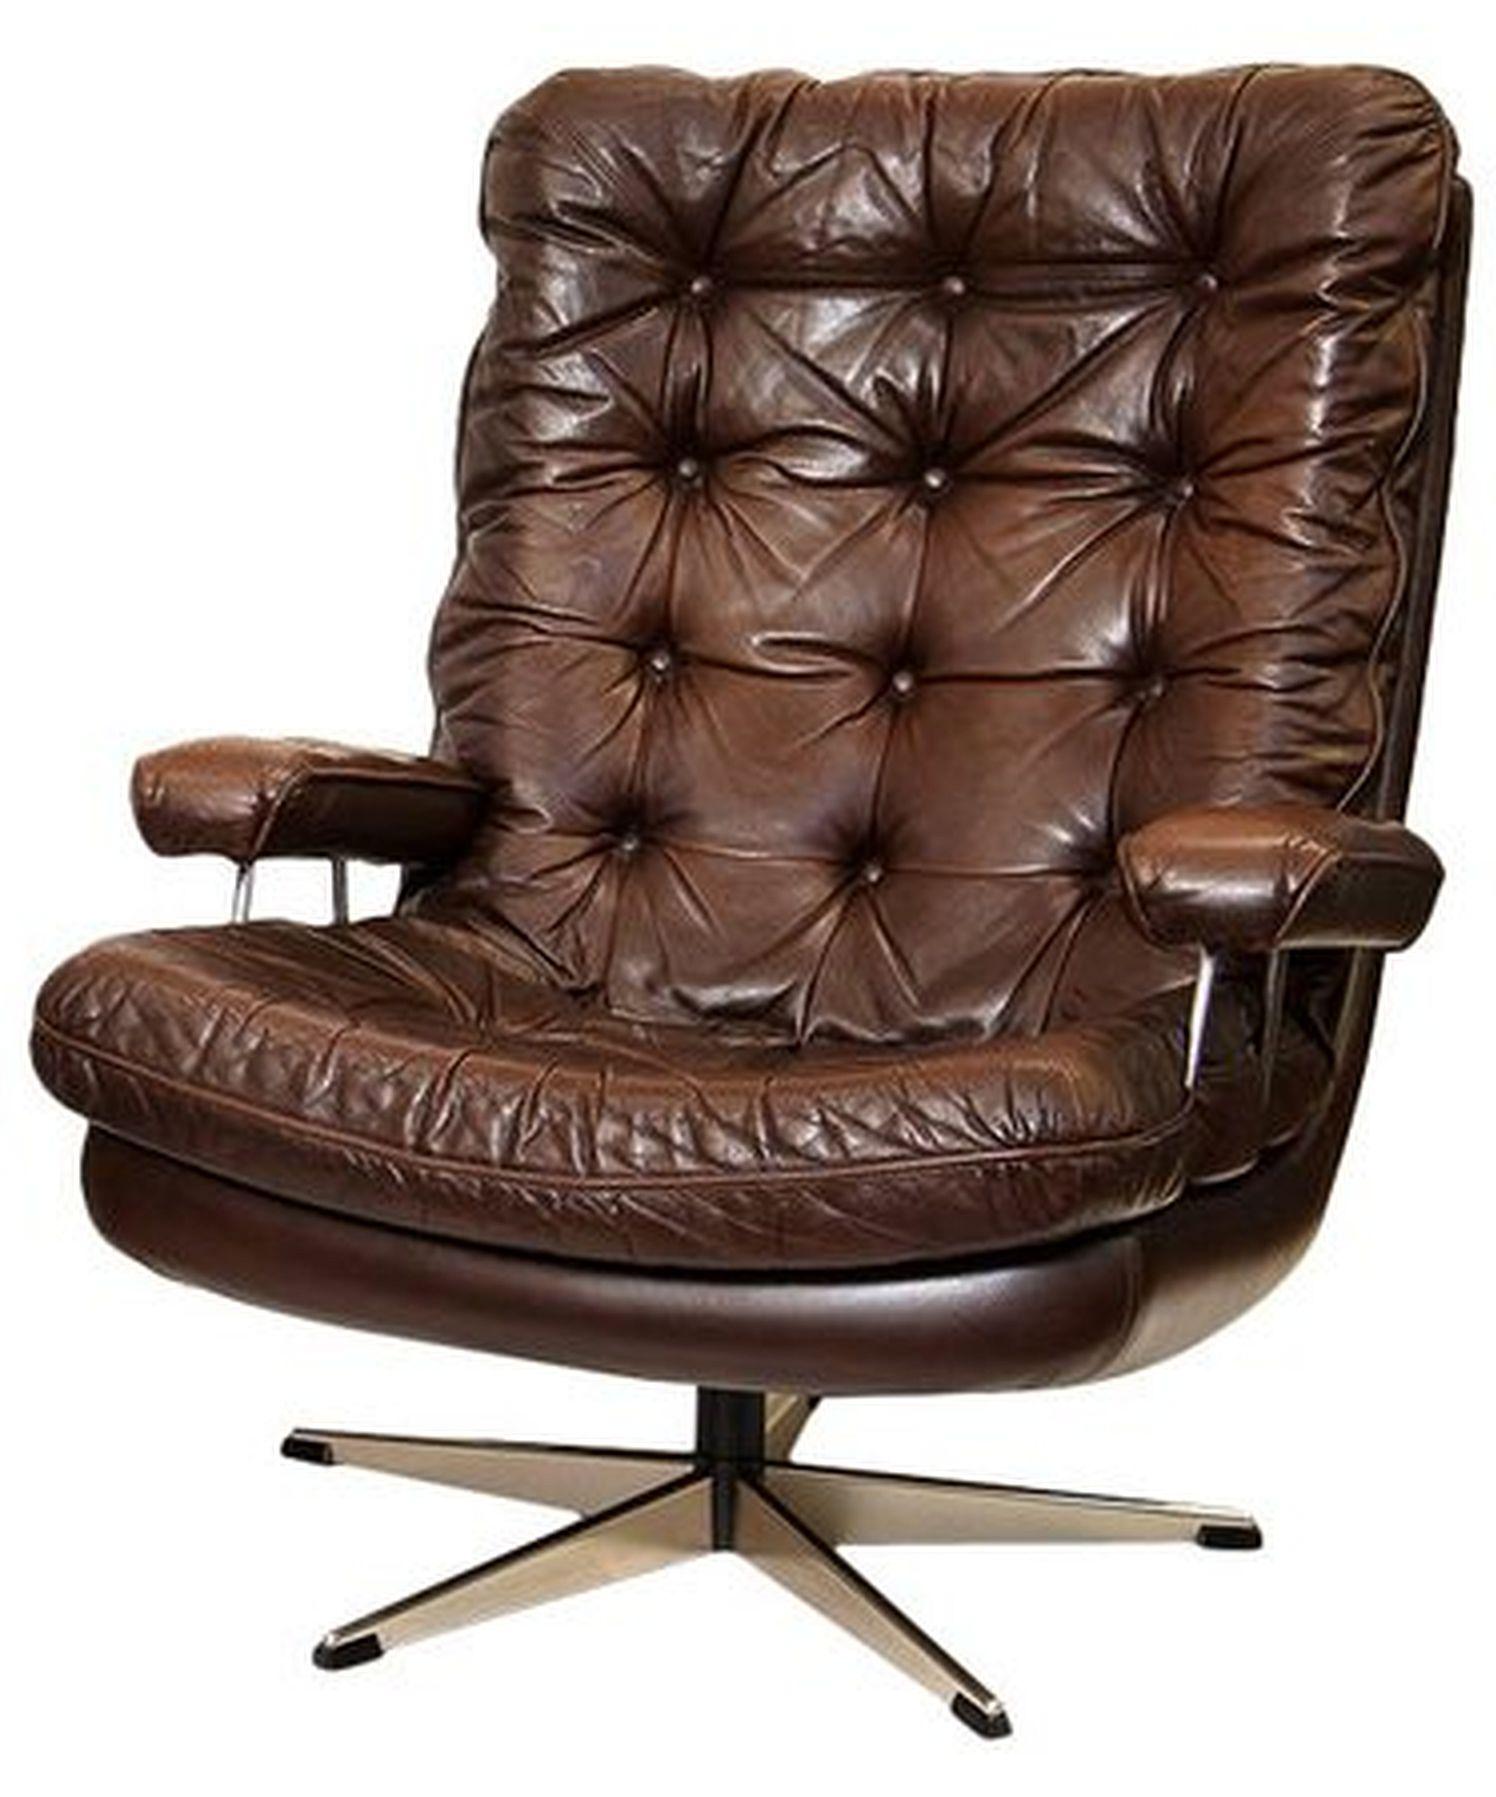 A handsome Danish swivel lounge chair of tufted leather sitting on a five star chrome swivel base. The leather has a good original patination, with a rich chocolate brown color. A very comfortable chair from Denmark, known for quality post war